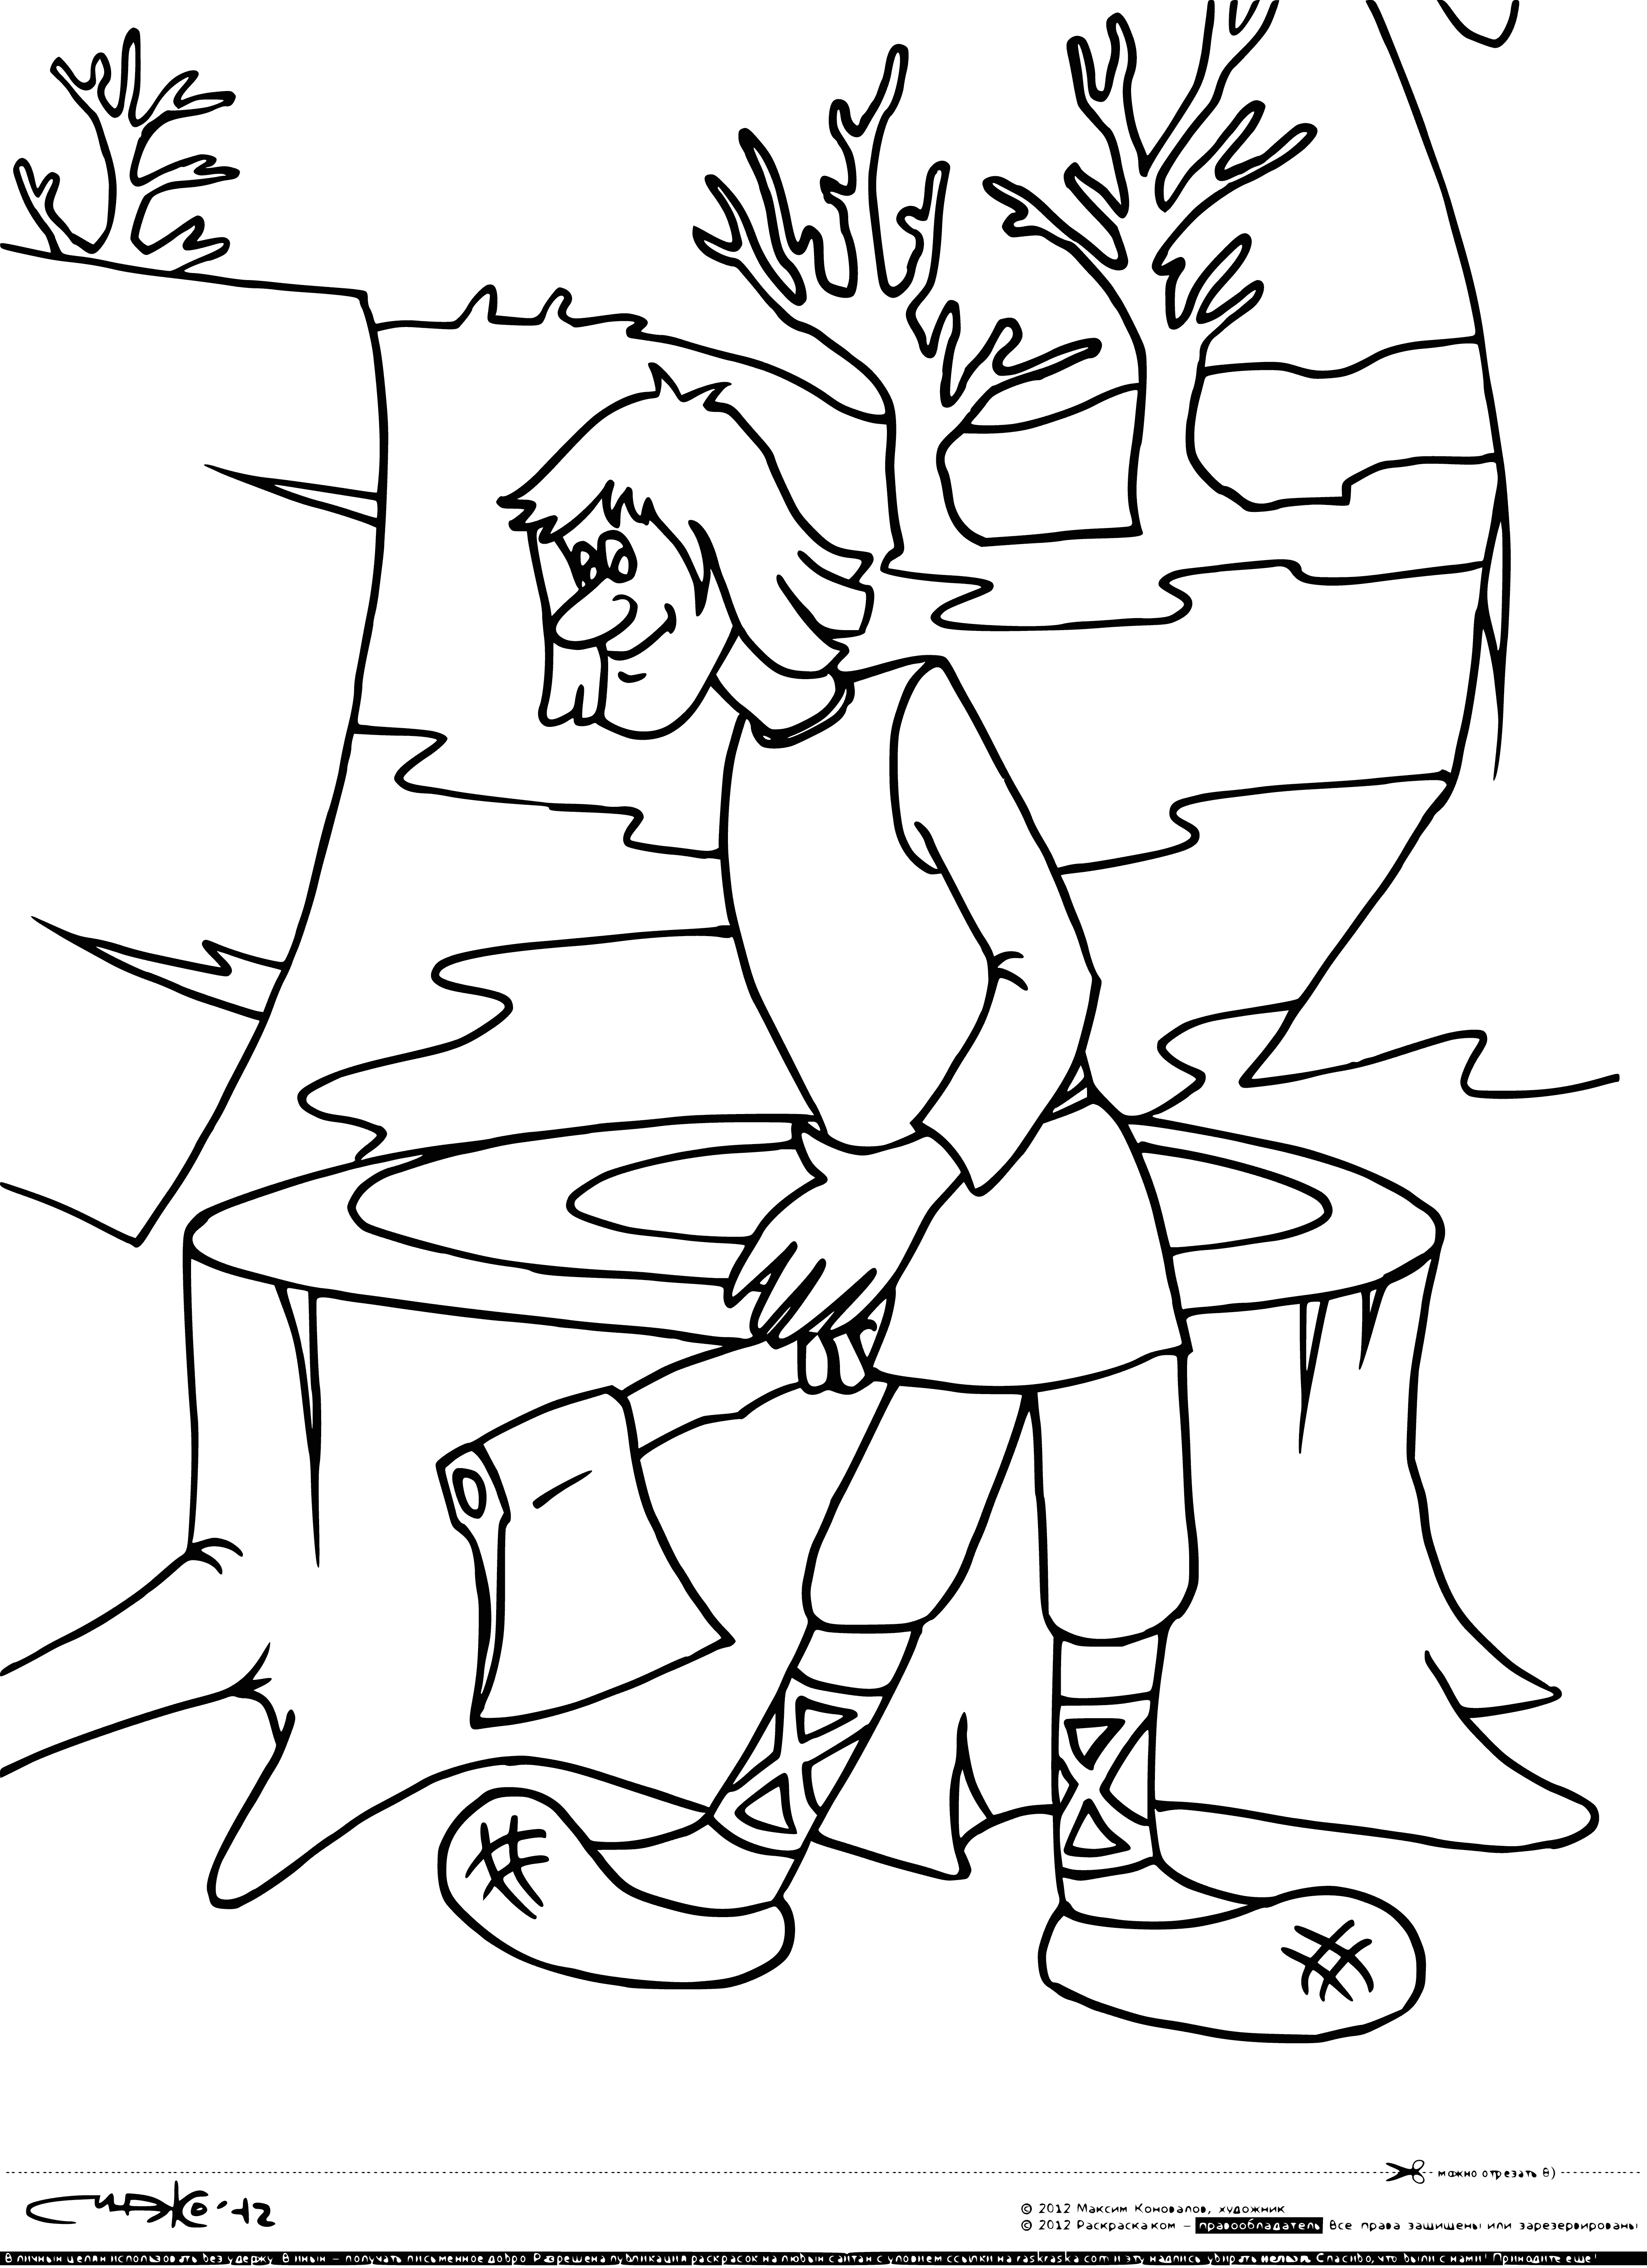 coloring page: Ivan stands atop his sail-ship, wearing blue shirt, brown pants, and black boots. Behind him is a 3-leveled platform with stairs and ladder. #seasailing